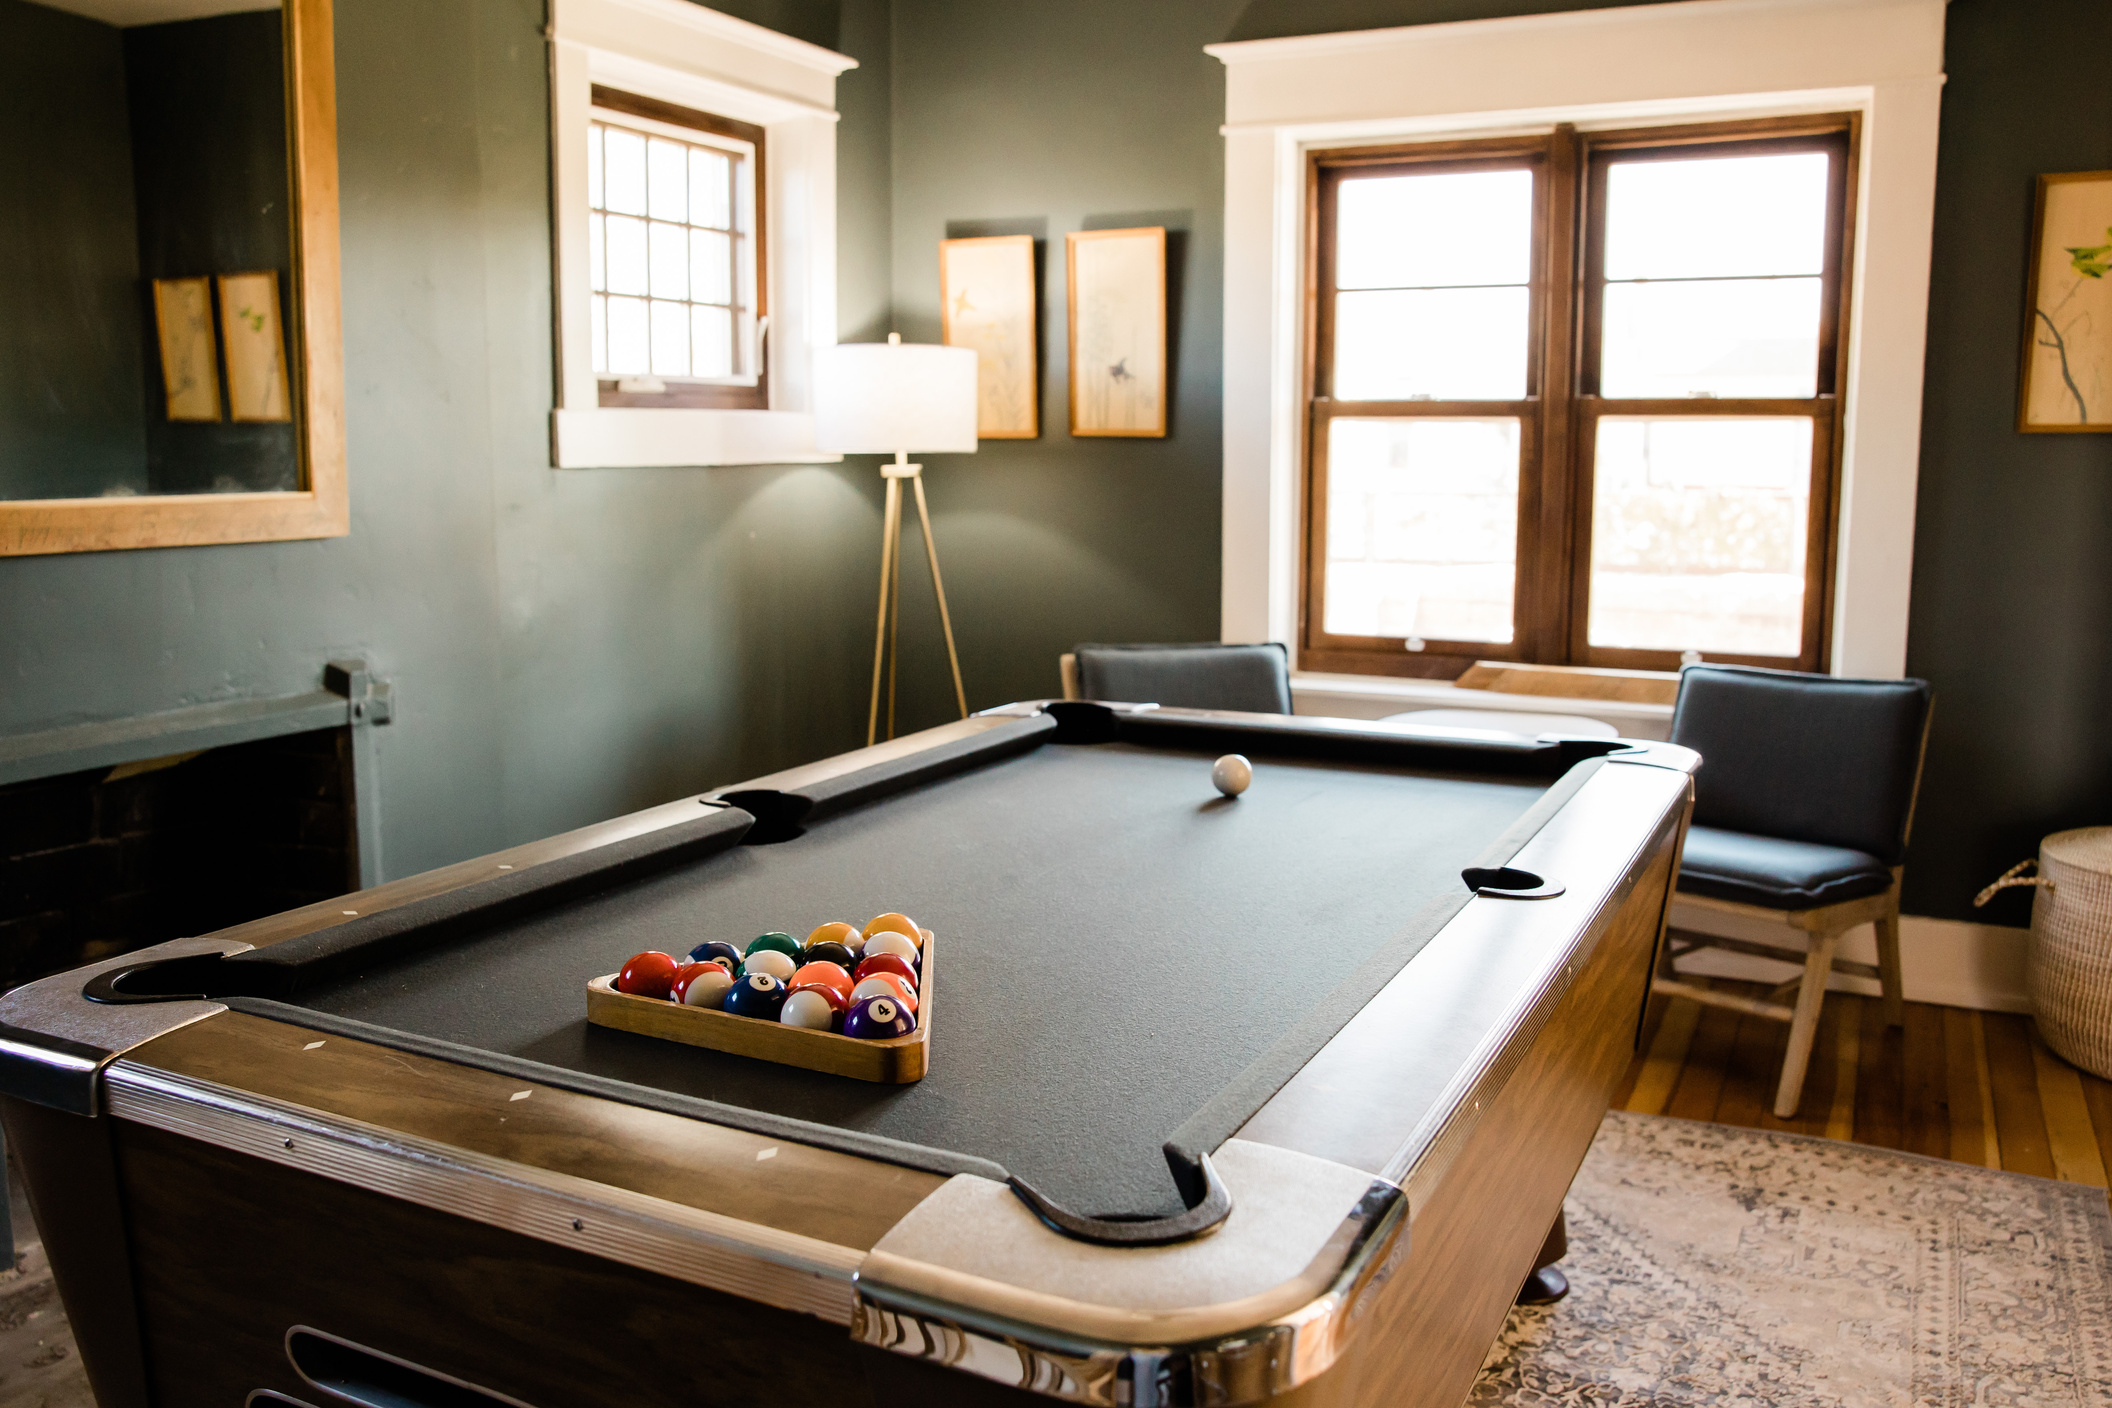 
Billiard Balls on the Game Table in a Room 